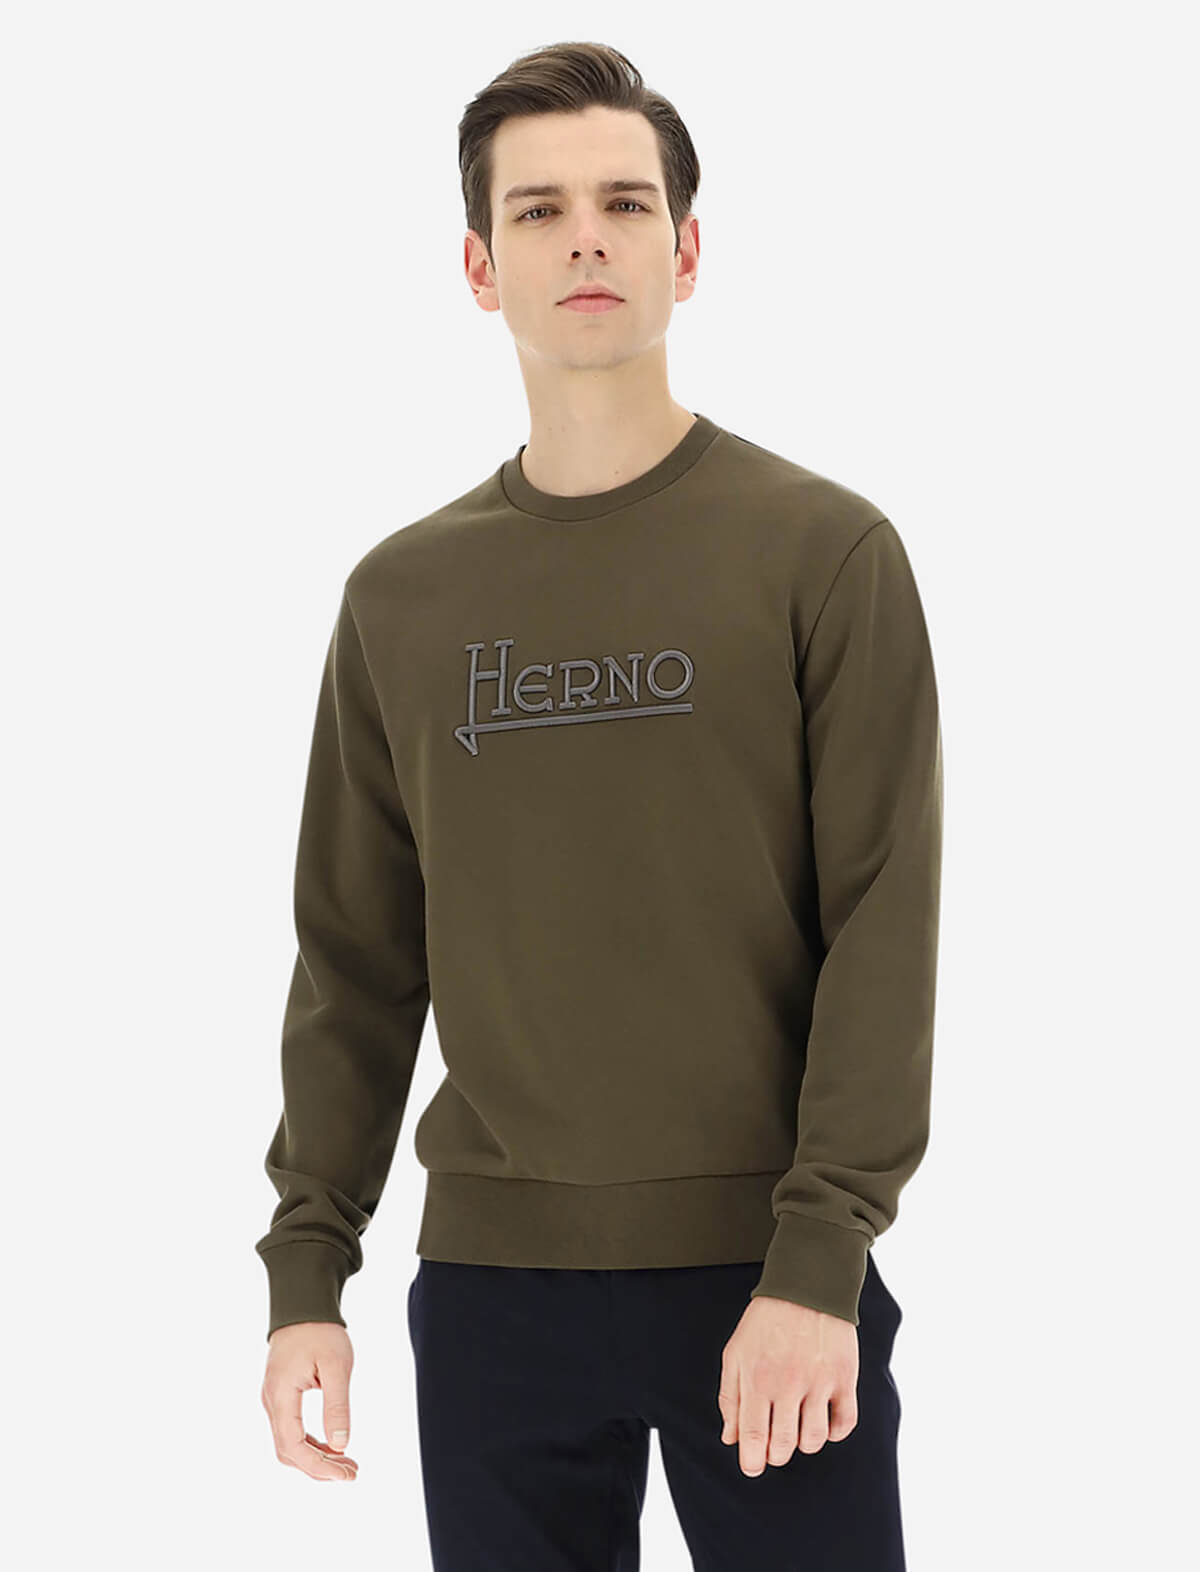 HERNO Cotton Sweater in Military Green